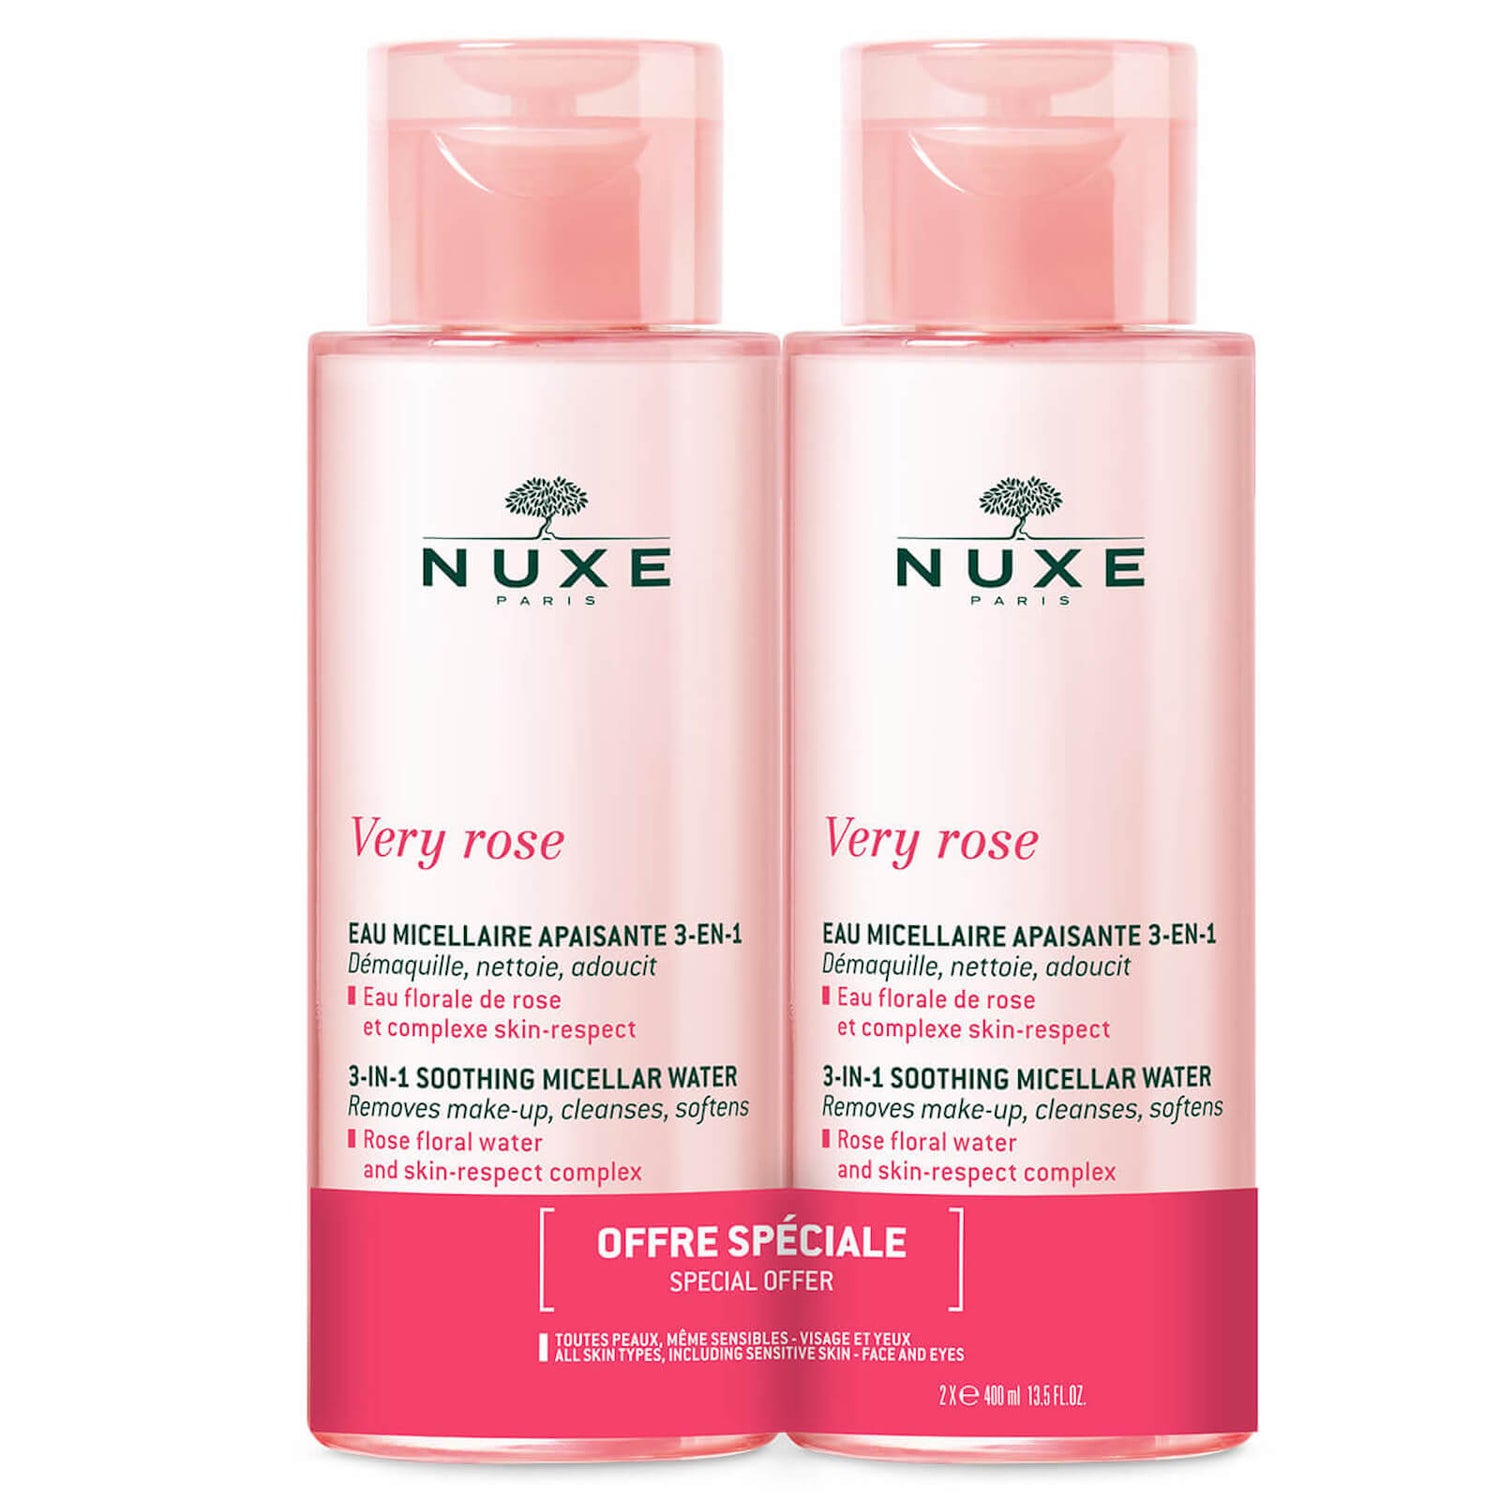 NUXE Very Rose 3-in-1 Soothing Micellar Water Duo 2 x 400ml (Worth £48.00)